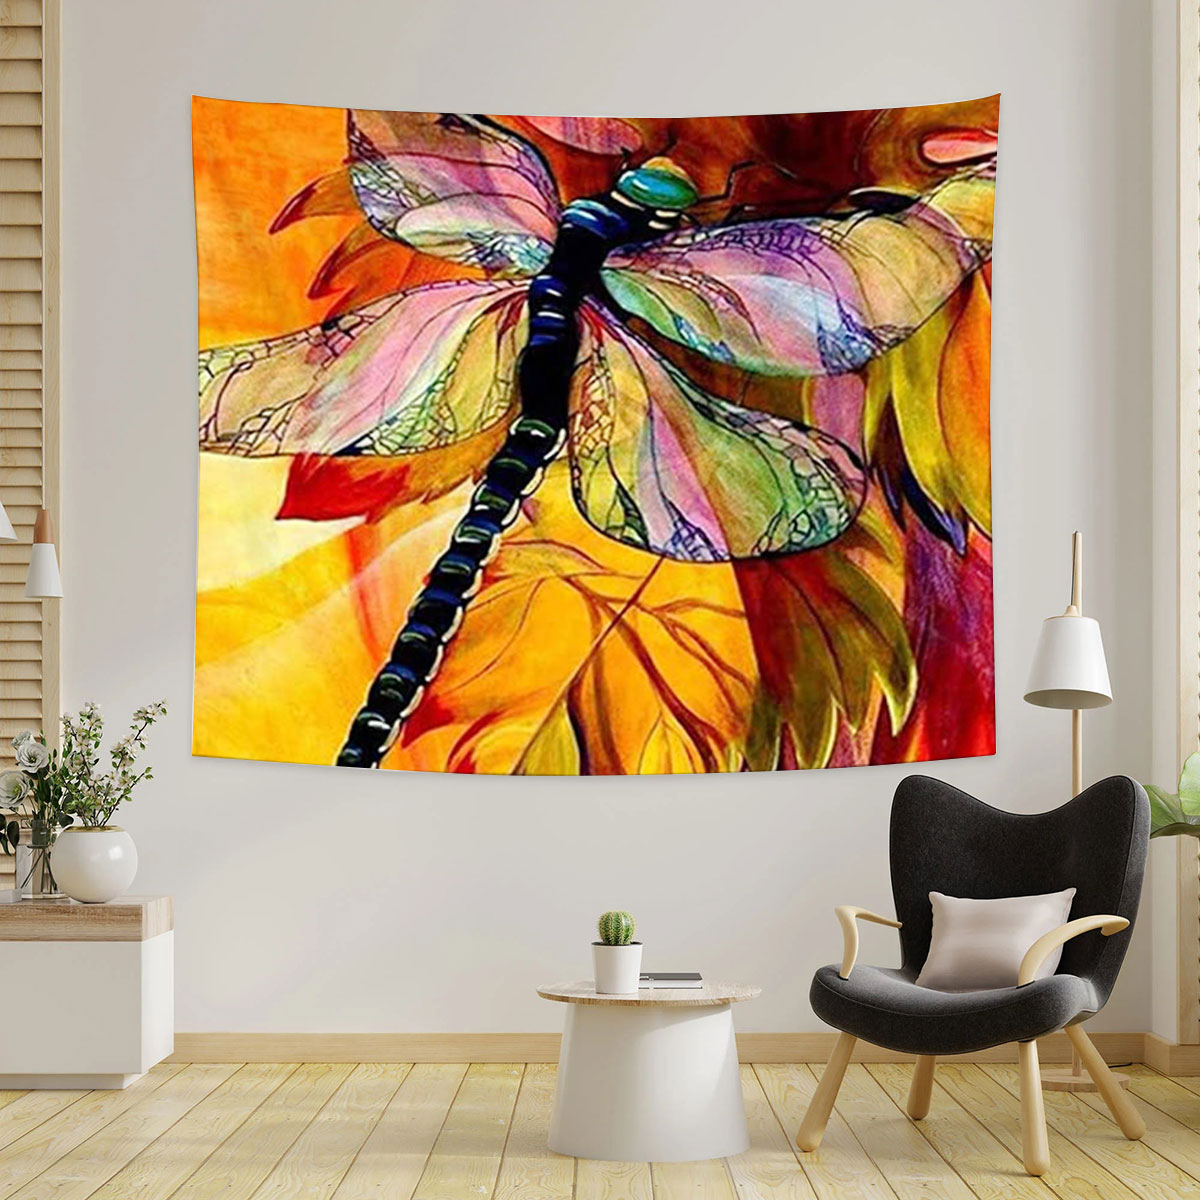 The Sunset Dragonfly Tapestry